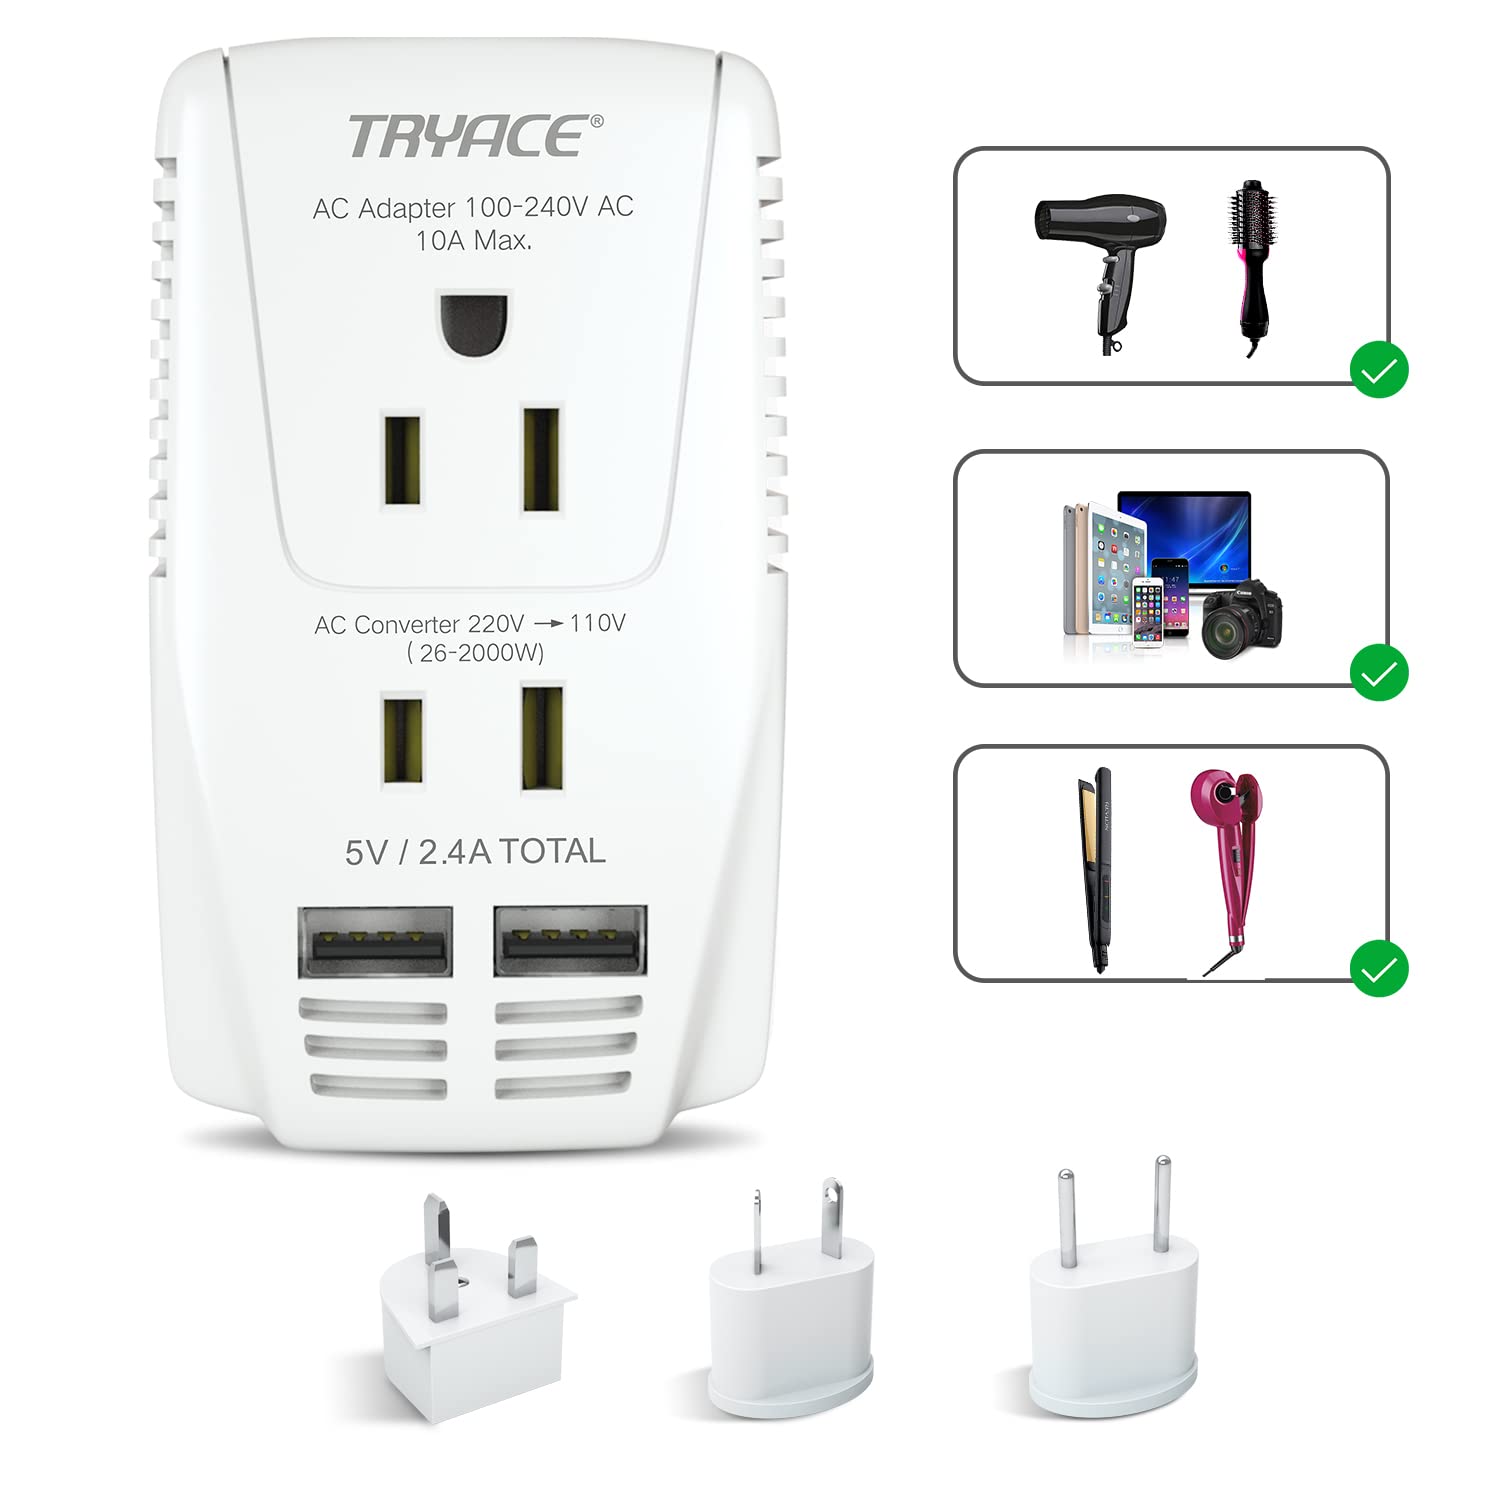 TryAce 2000W Travel Voltage Converter Step Down 220v to 110v Power Converter for Hair Dryer Straightener Curling Iron, 10A Power